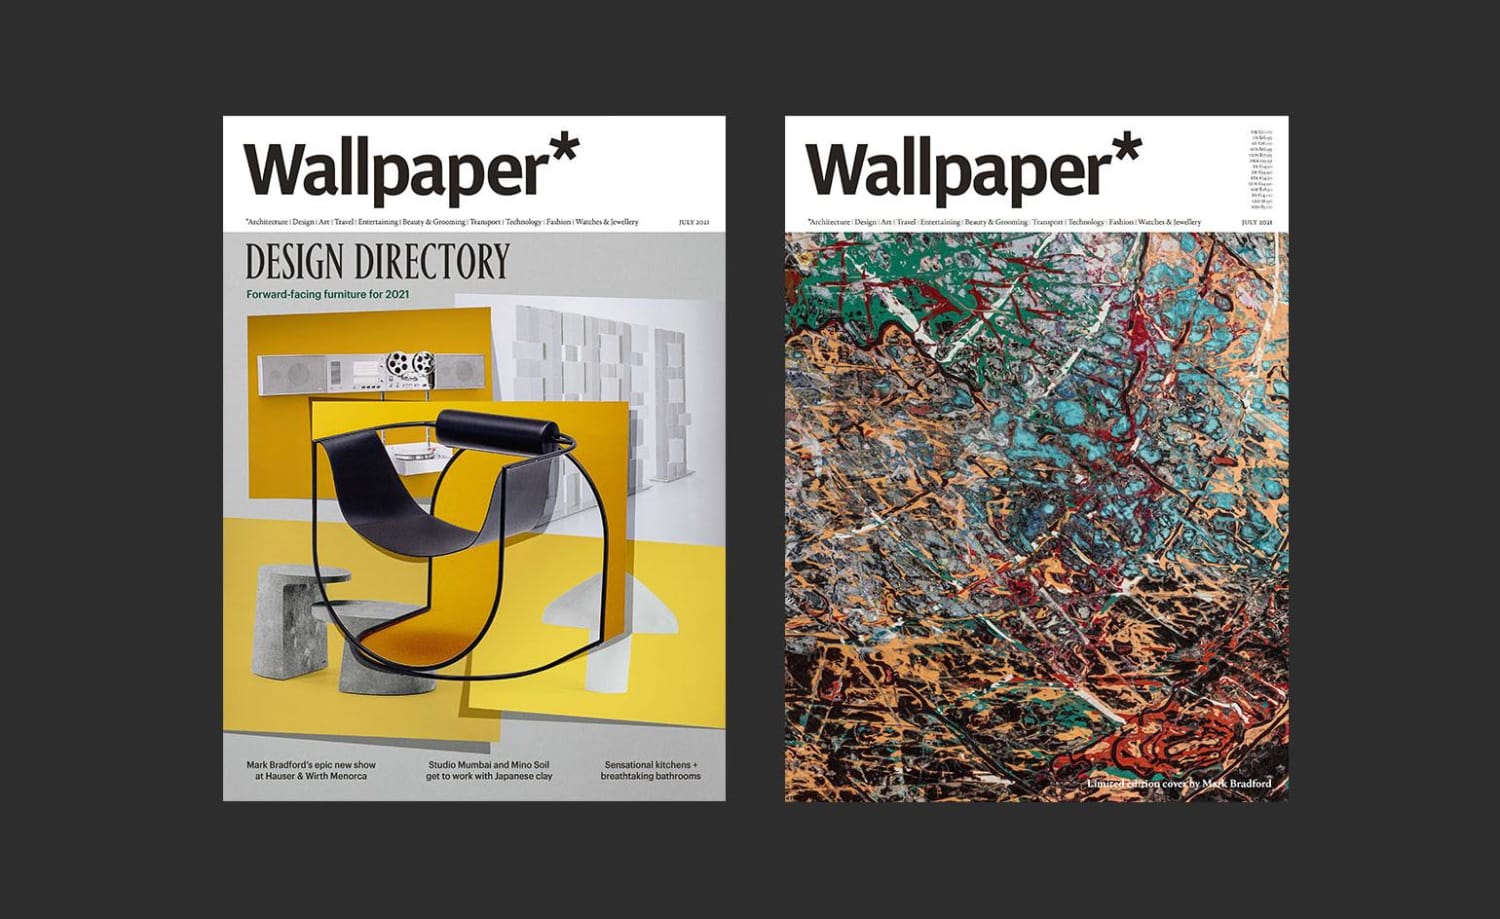 Introducing the July 2021 Design Directory Issue of Wallpaper*